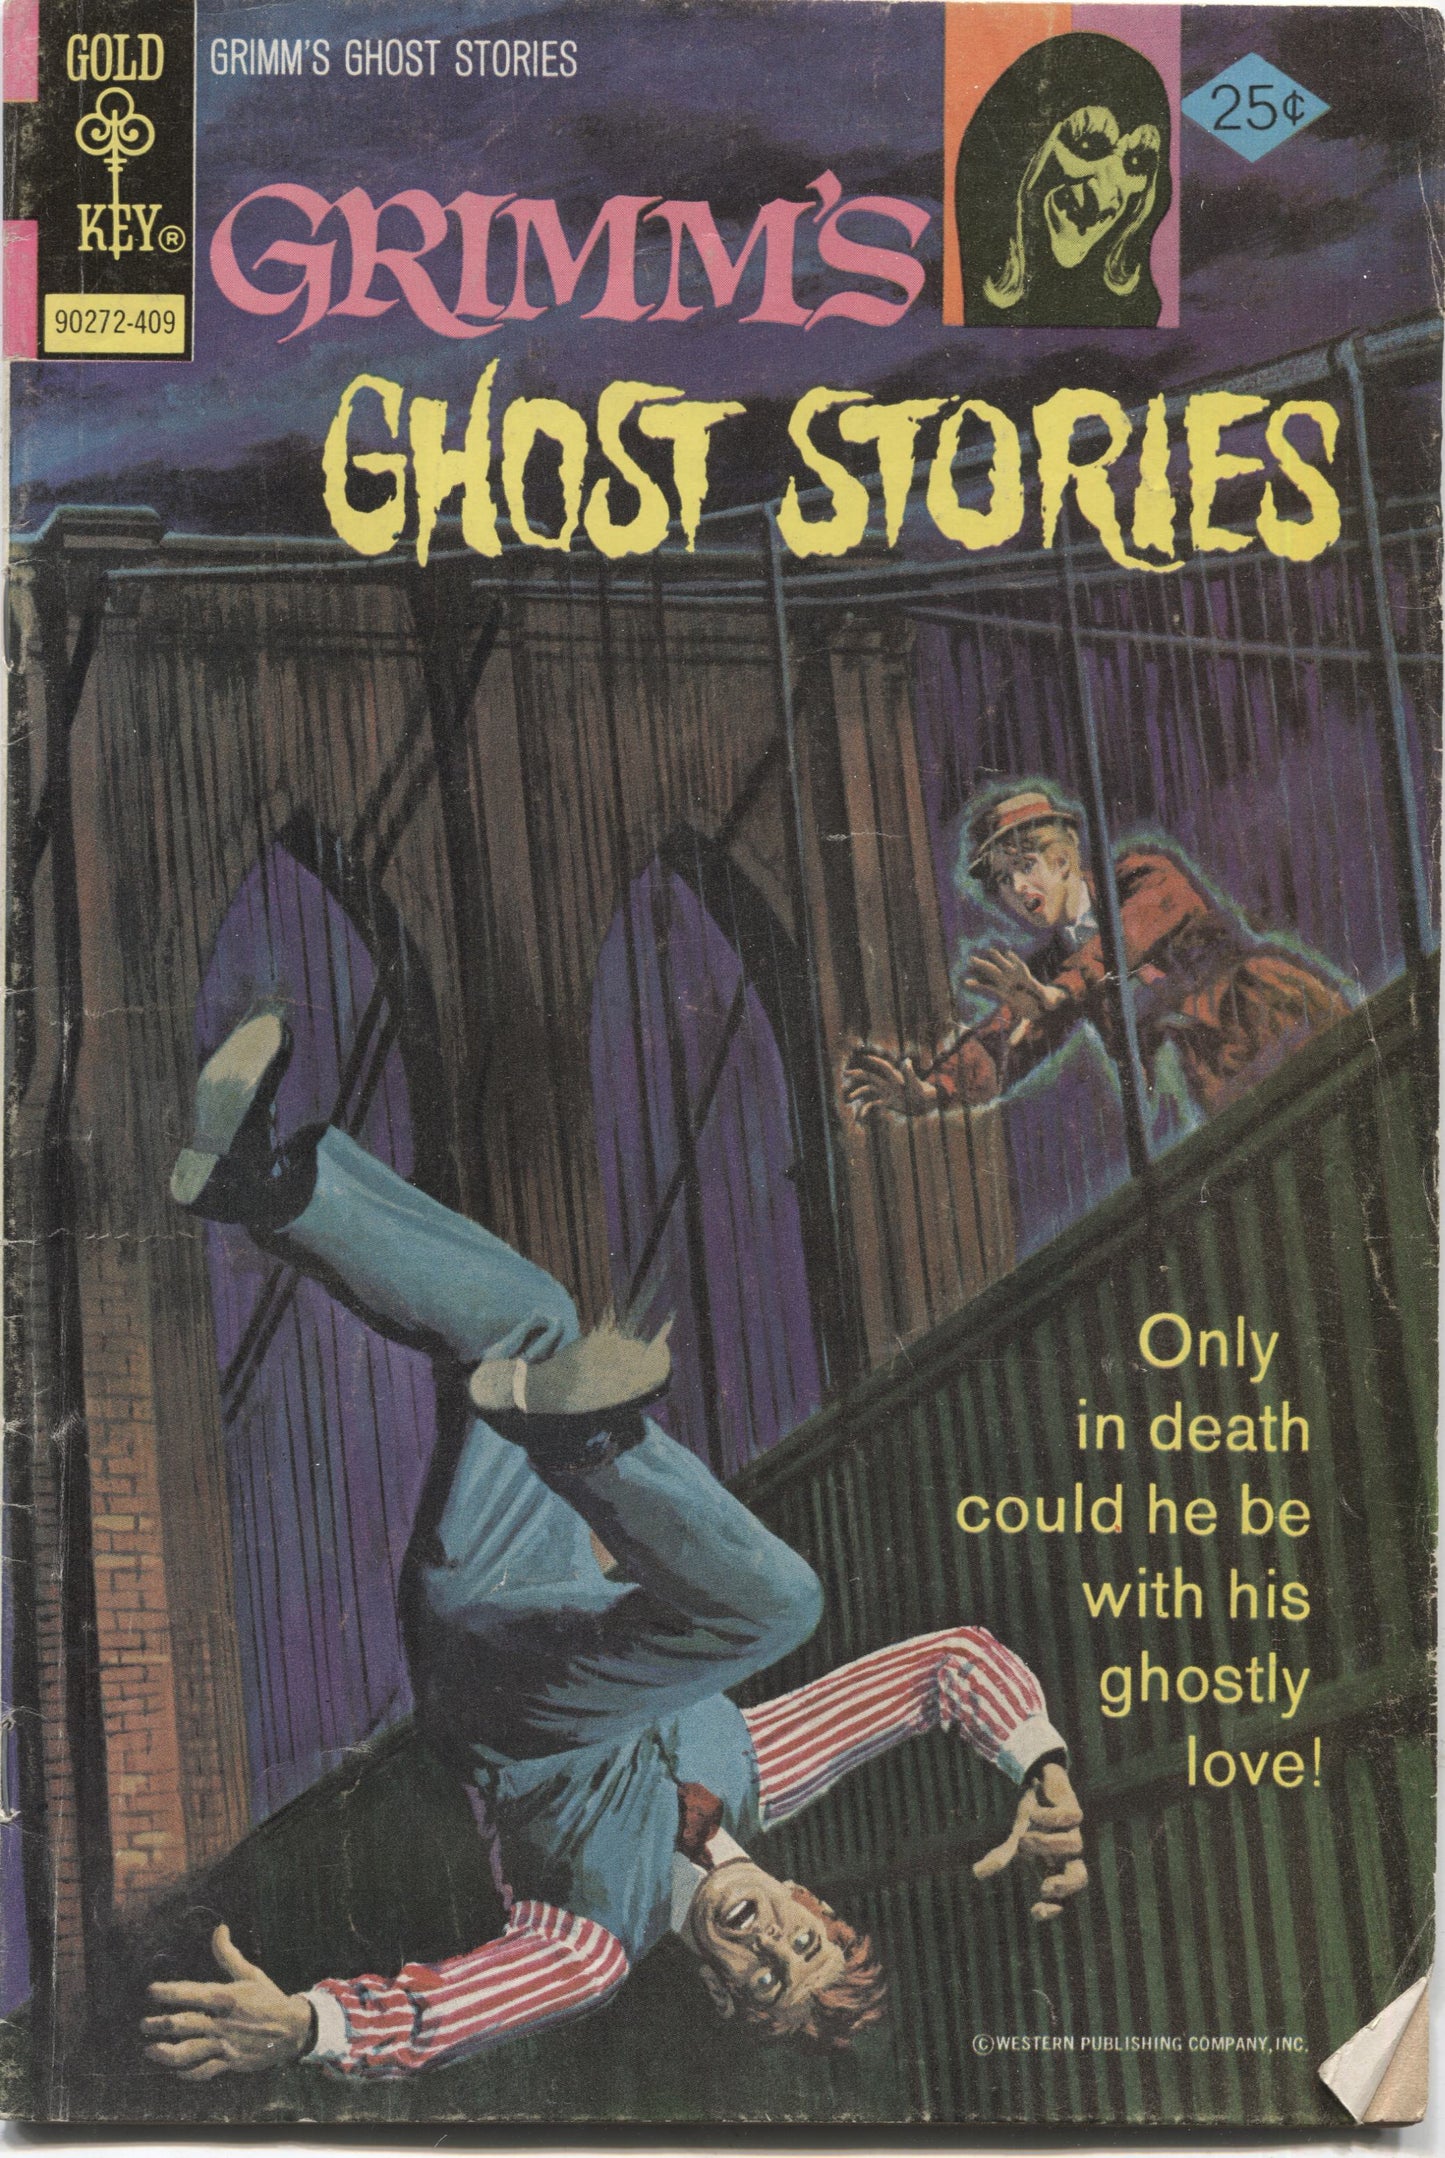 Grimm's Ghost Stories No. 19, Gold Key Comics, September 1974